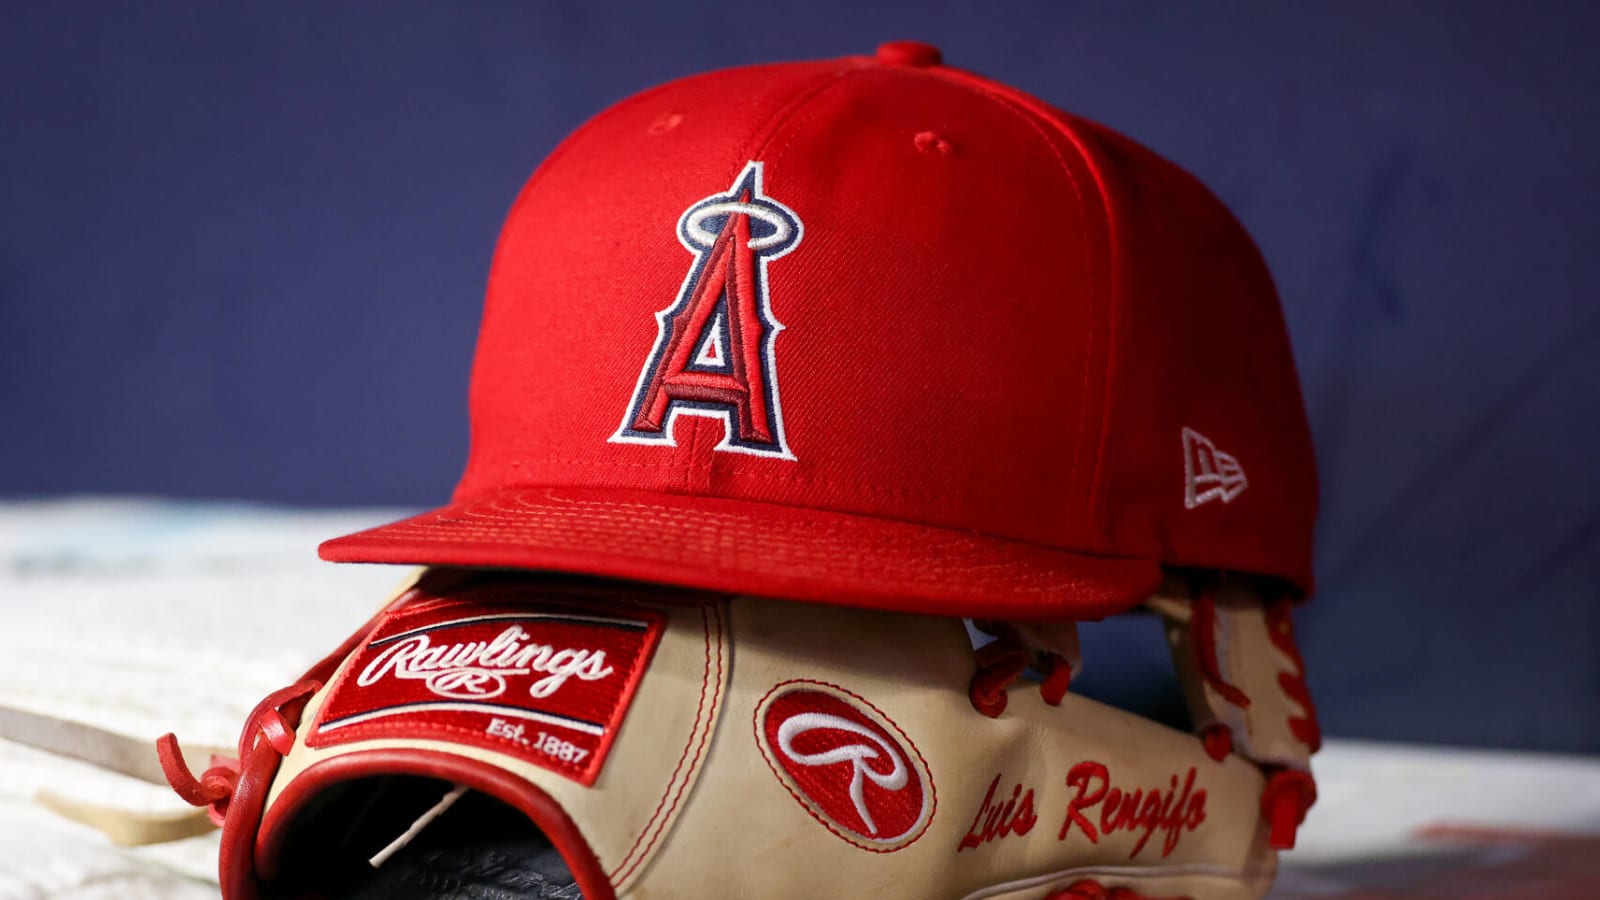 Angels may have found way to avoid luxury tax